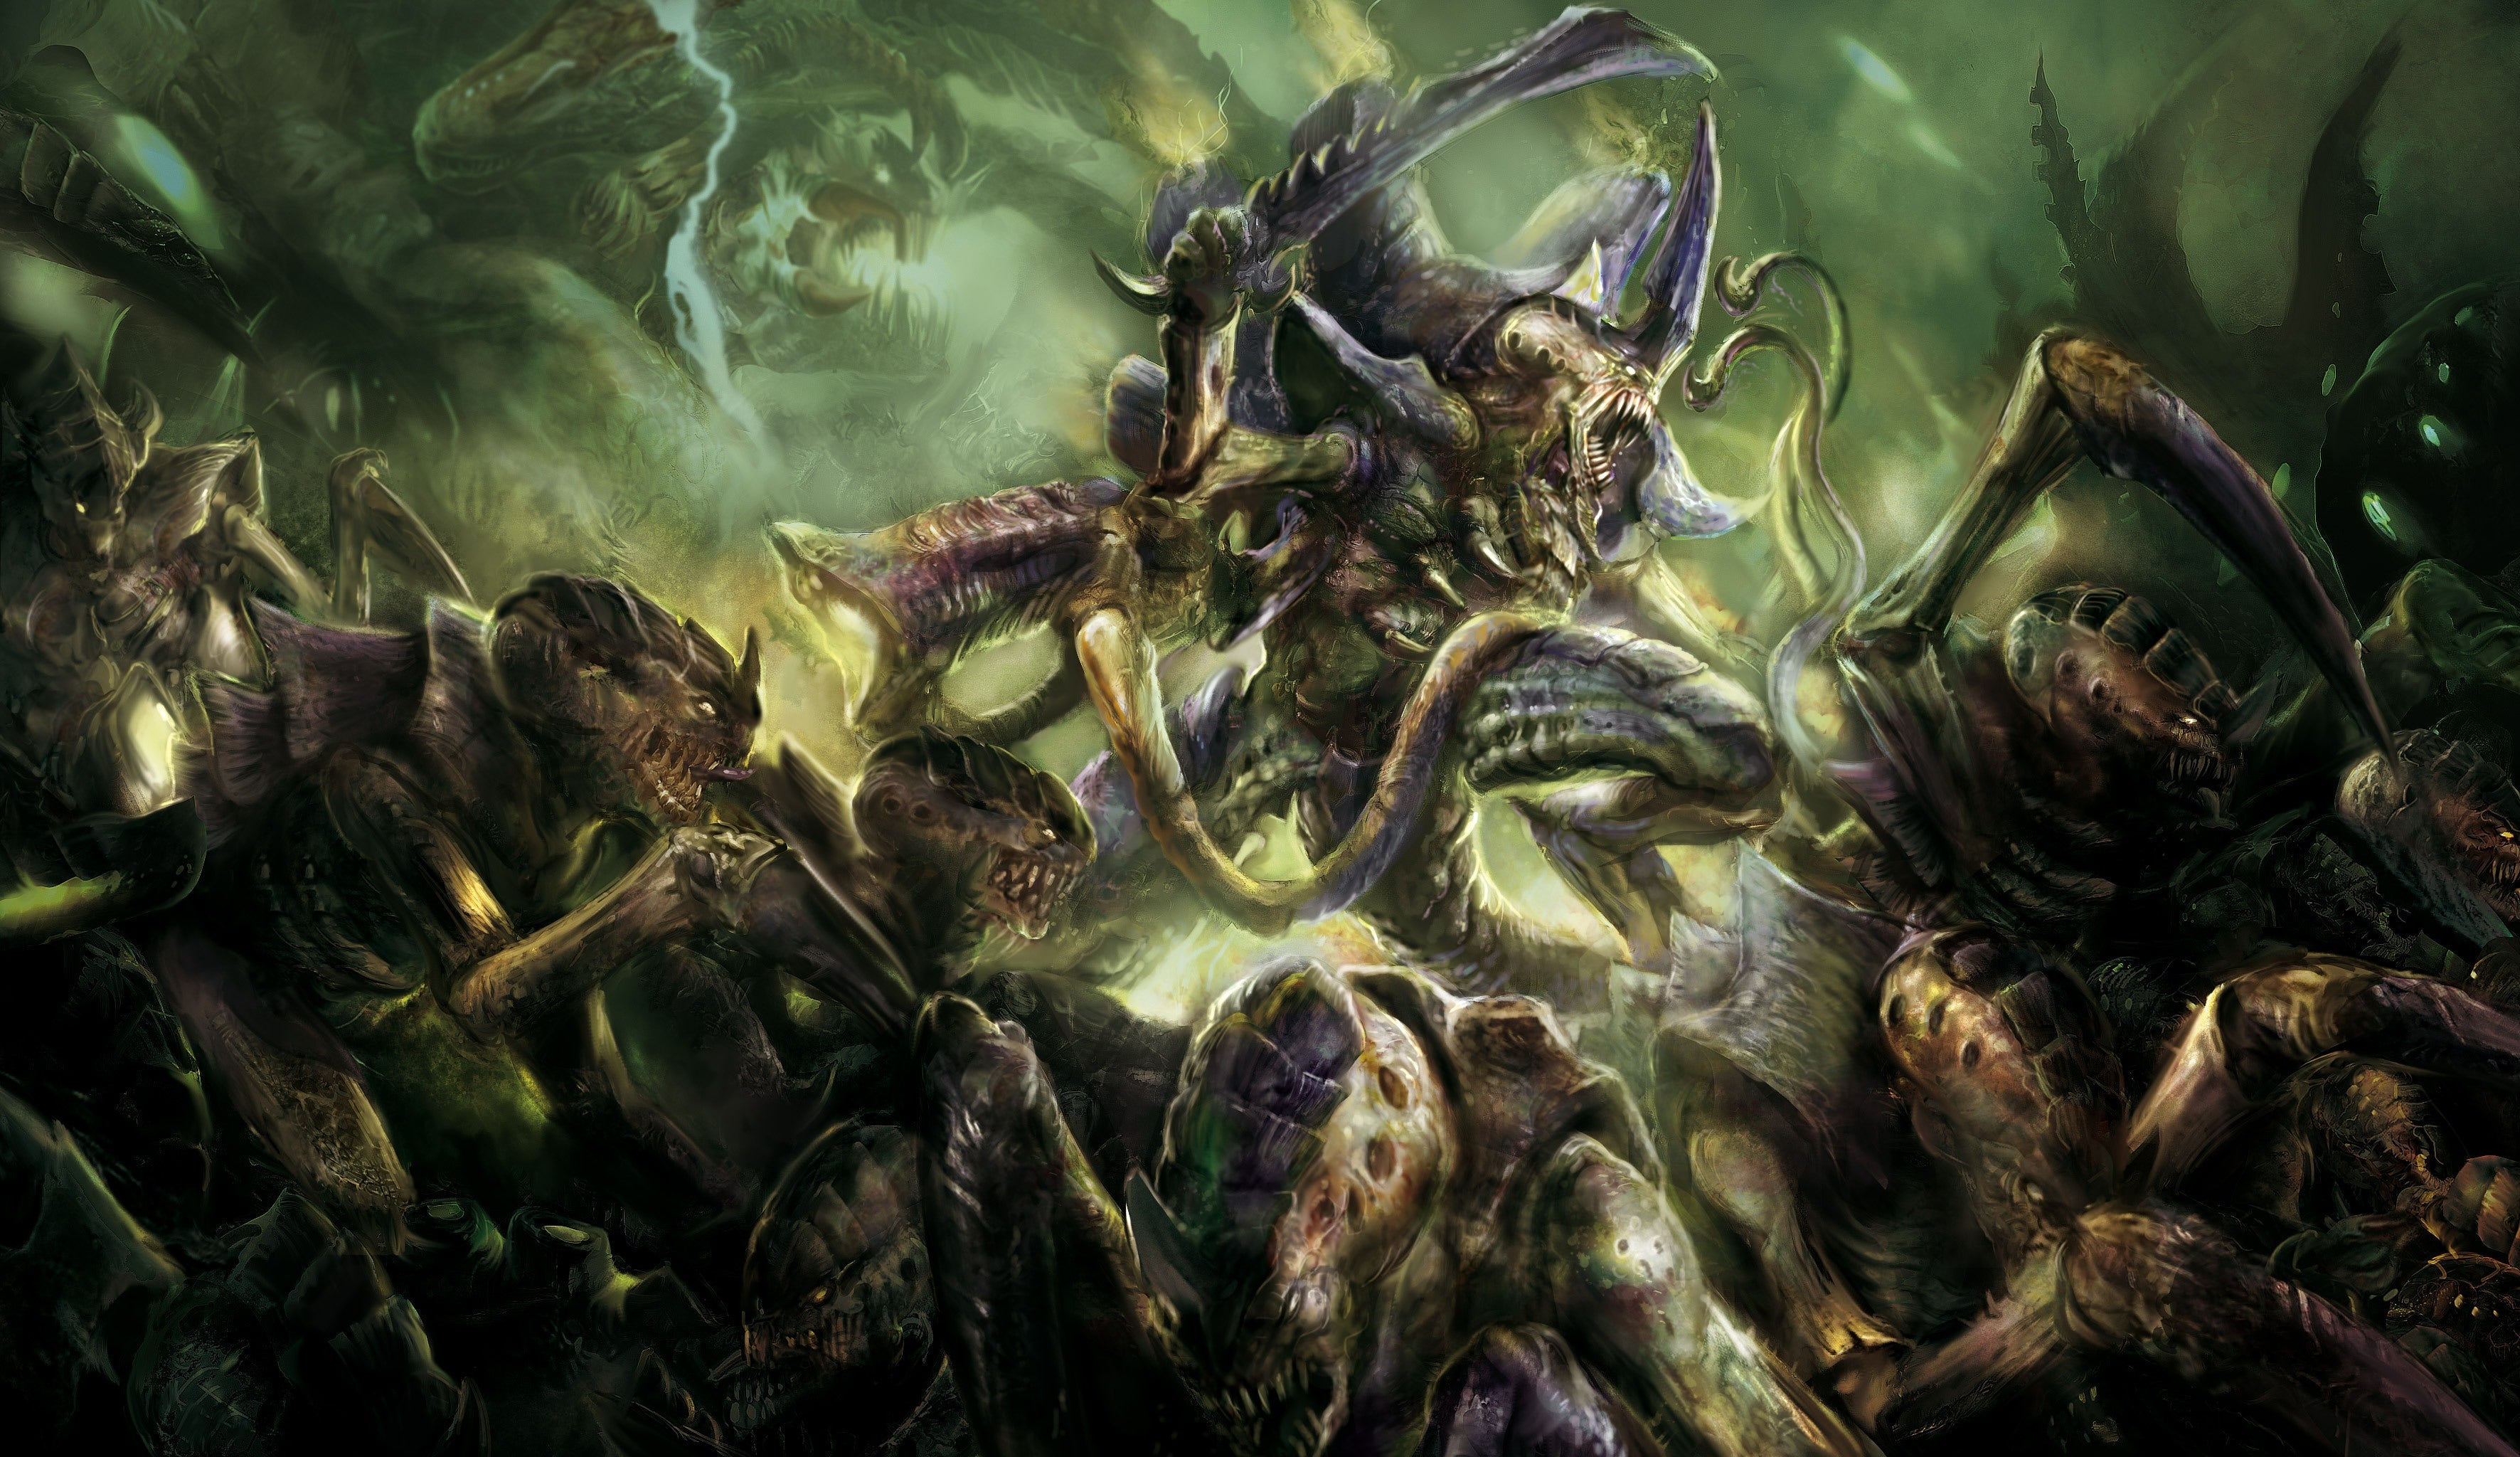 The MTG Warhammer 40k Tyranids deck looks strong, and hungry